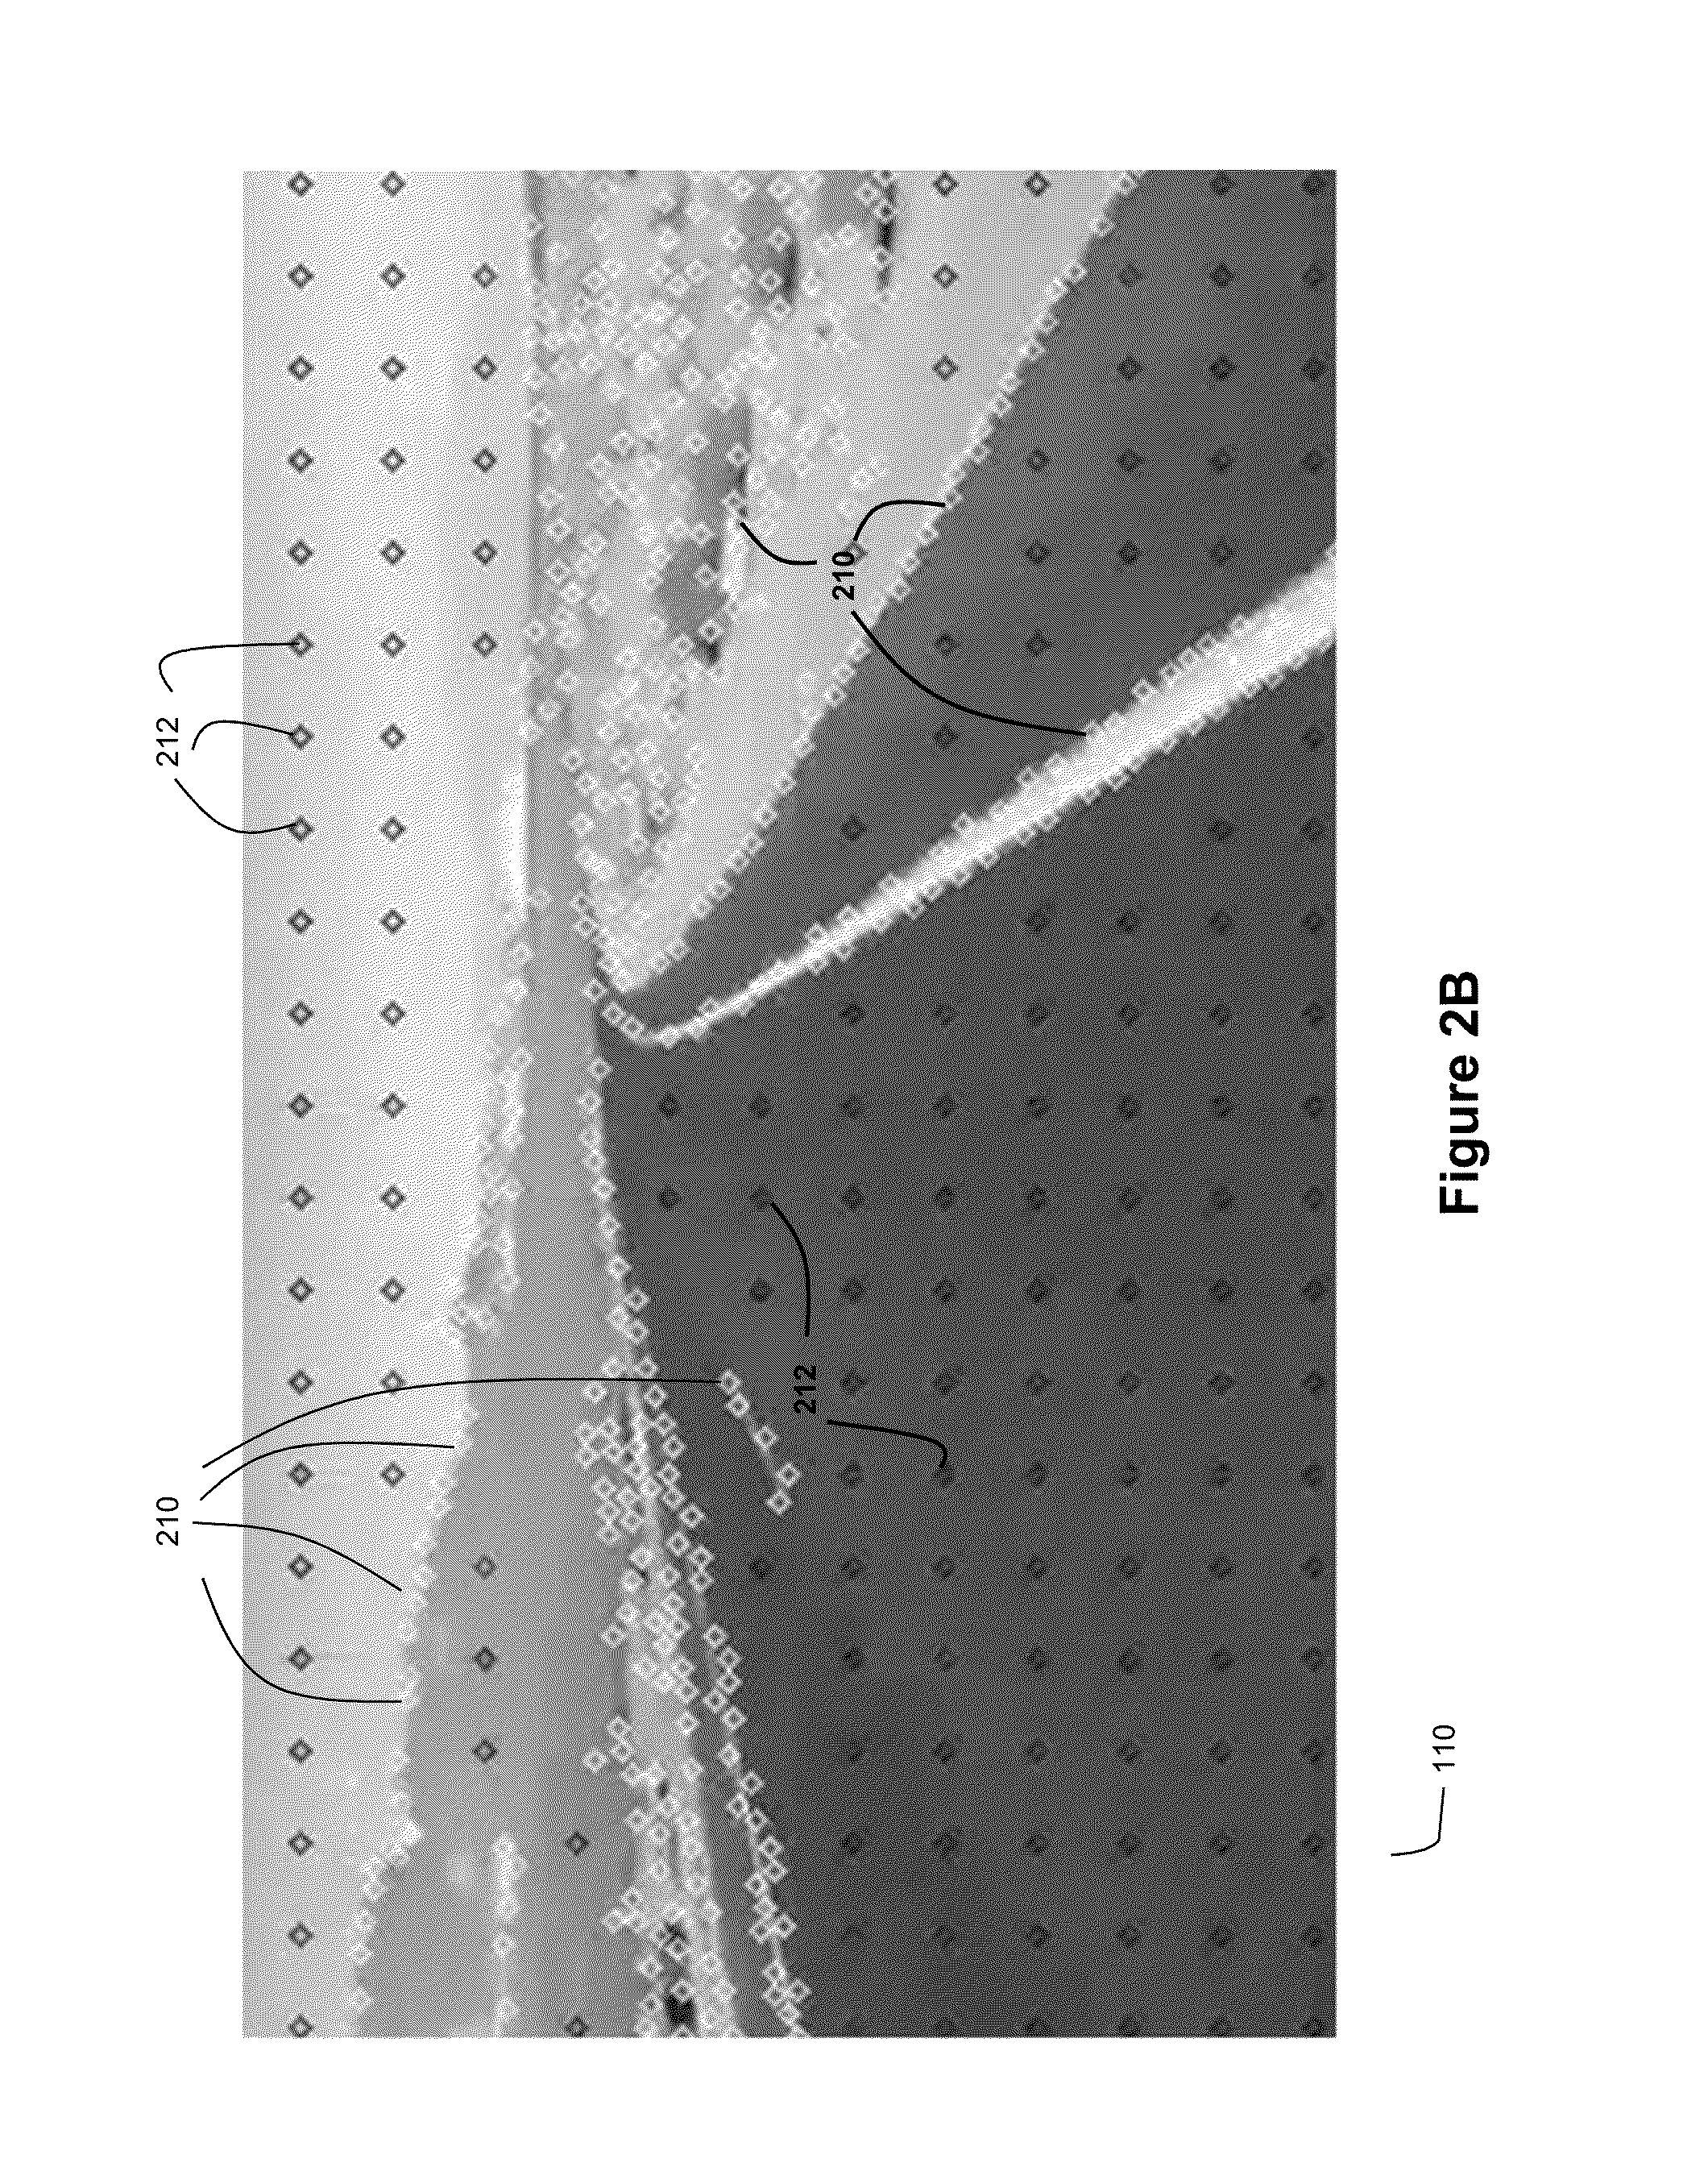 Method and System for Ladar Transmission with Closed Loop Feedback Control of Dynamic Scan Patterns